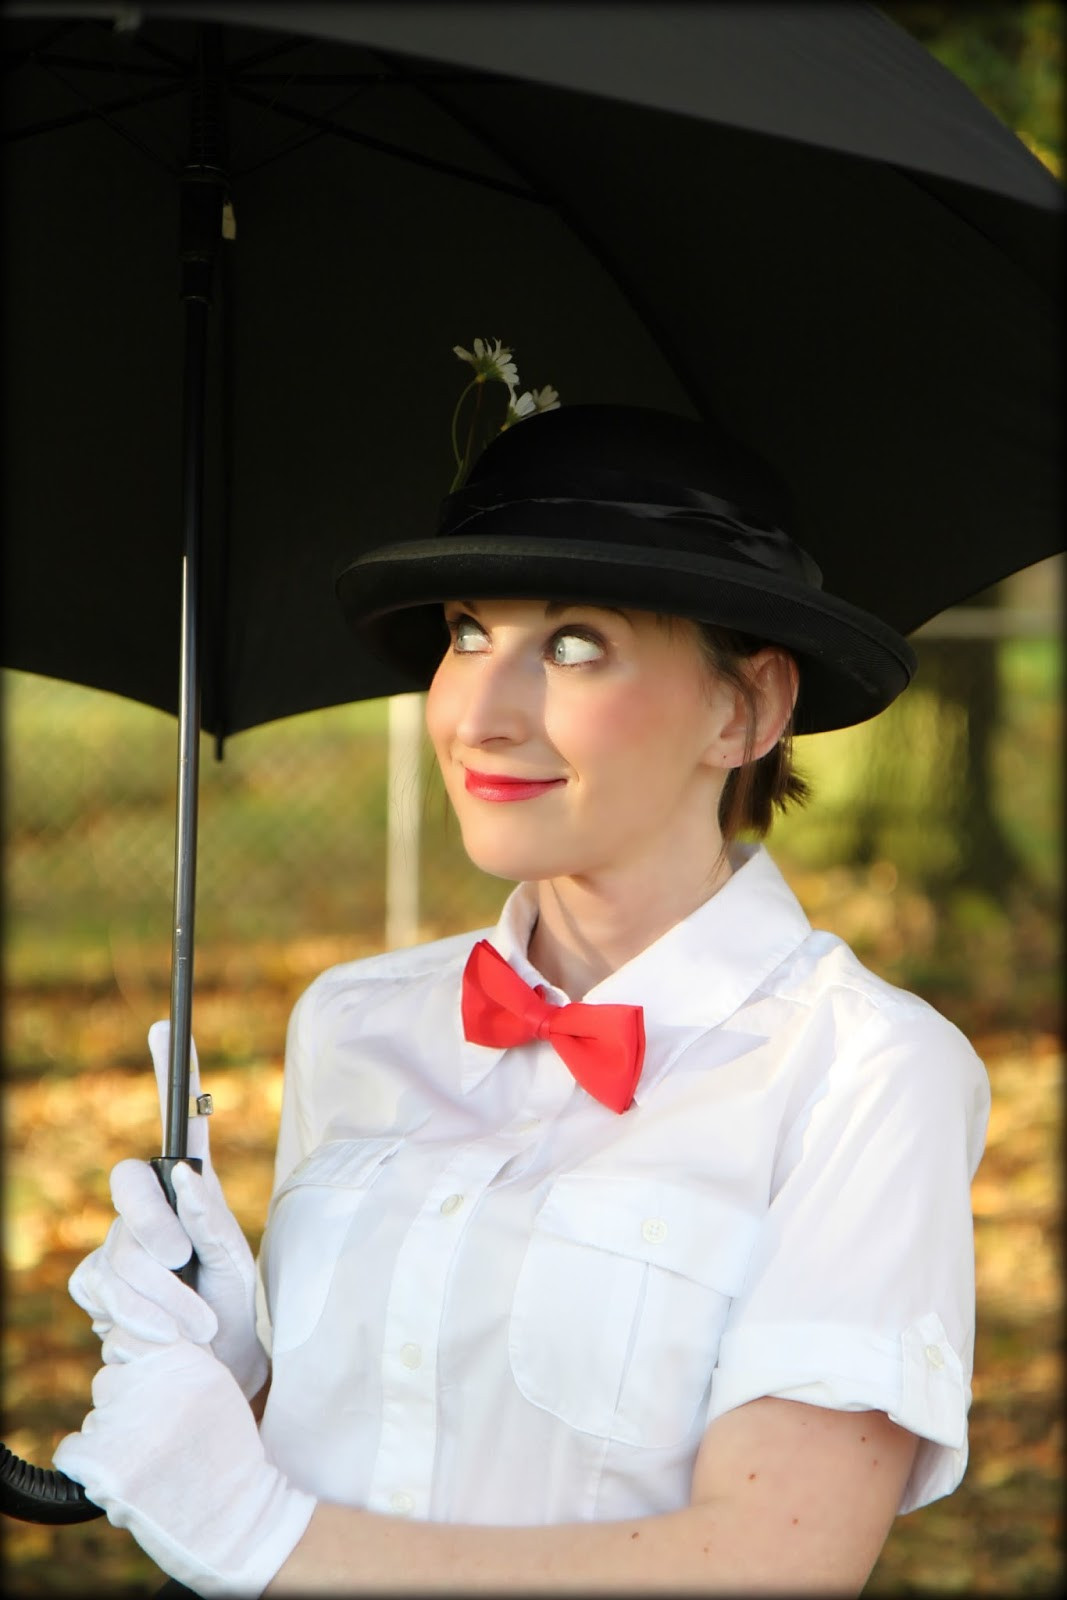 Mary Poppins Costume DIY
 Goodwill Tips 7 New DIY Halloween Costumes